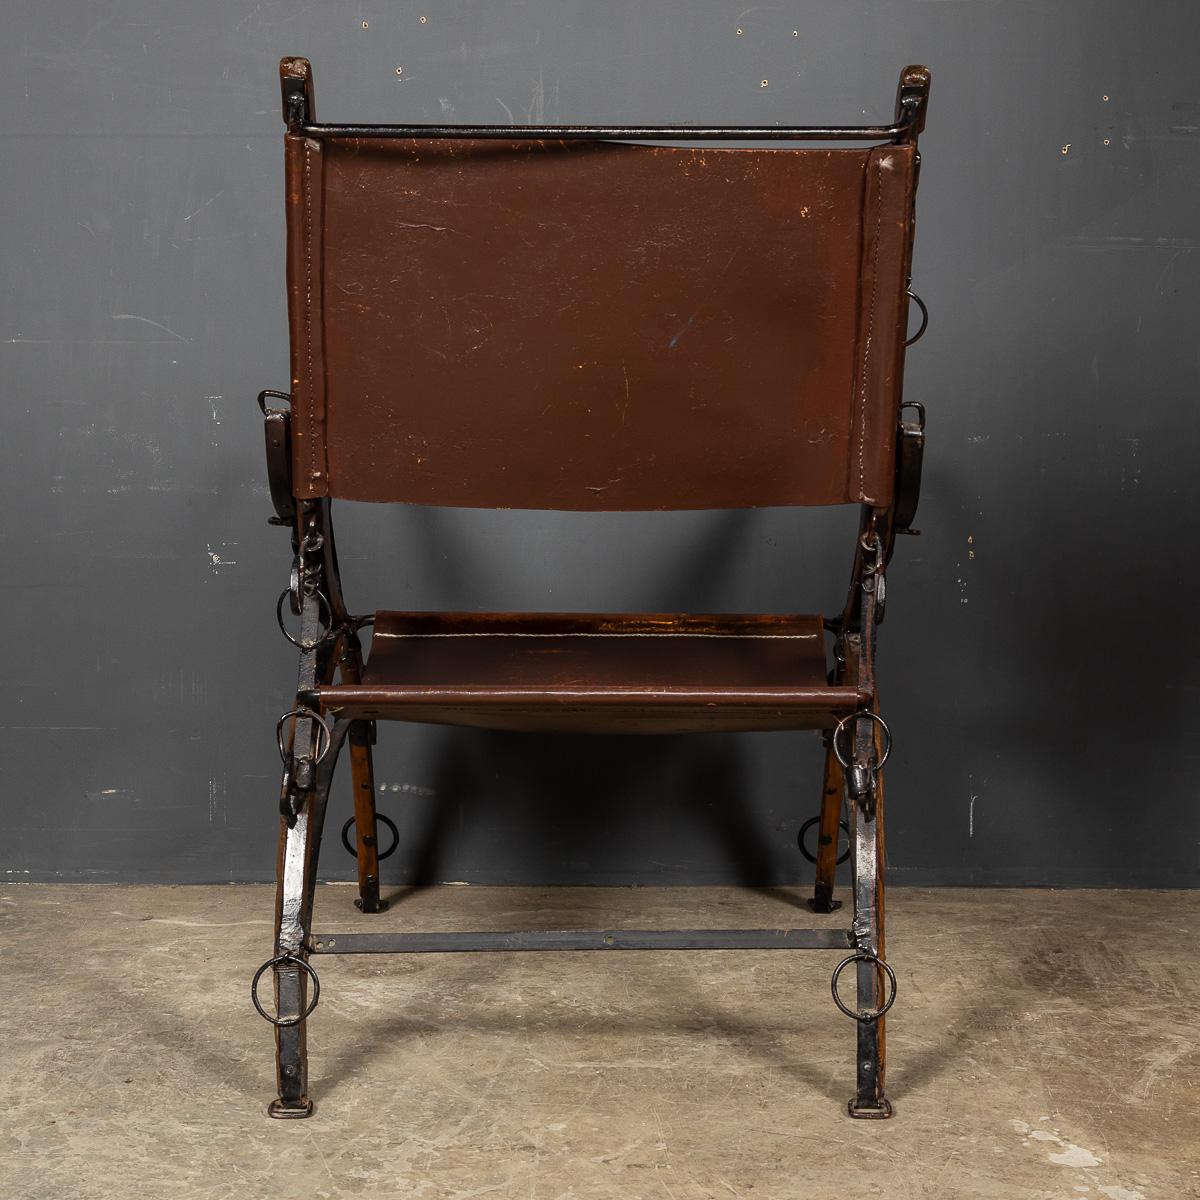 British Antique 20th Century Leather Horses Harness Chair c.1900